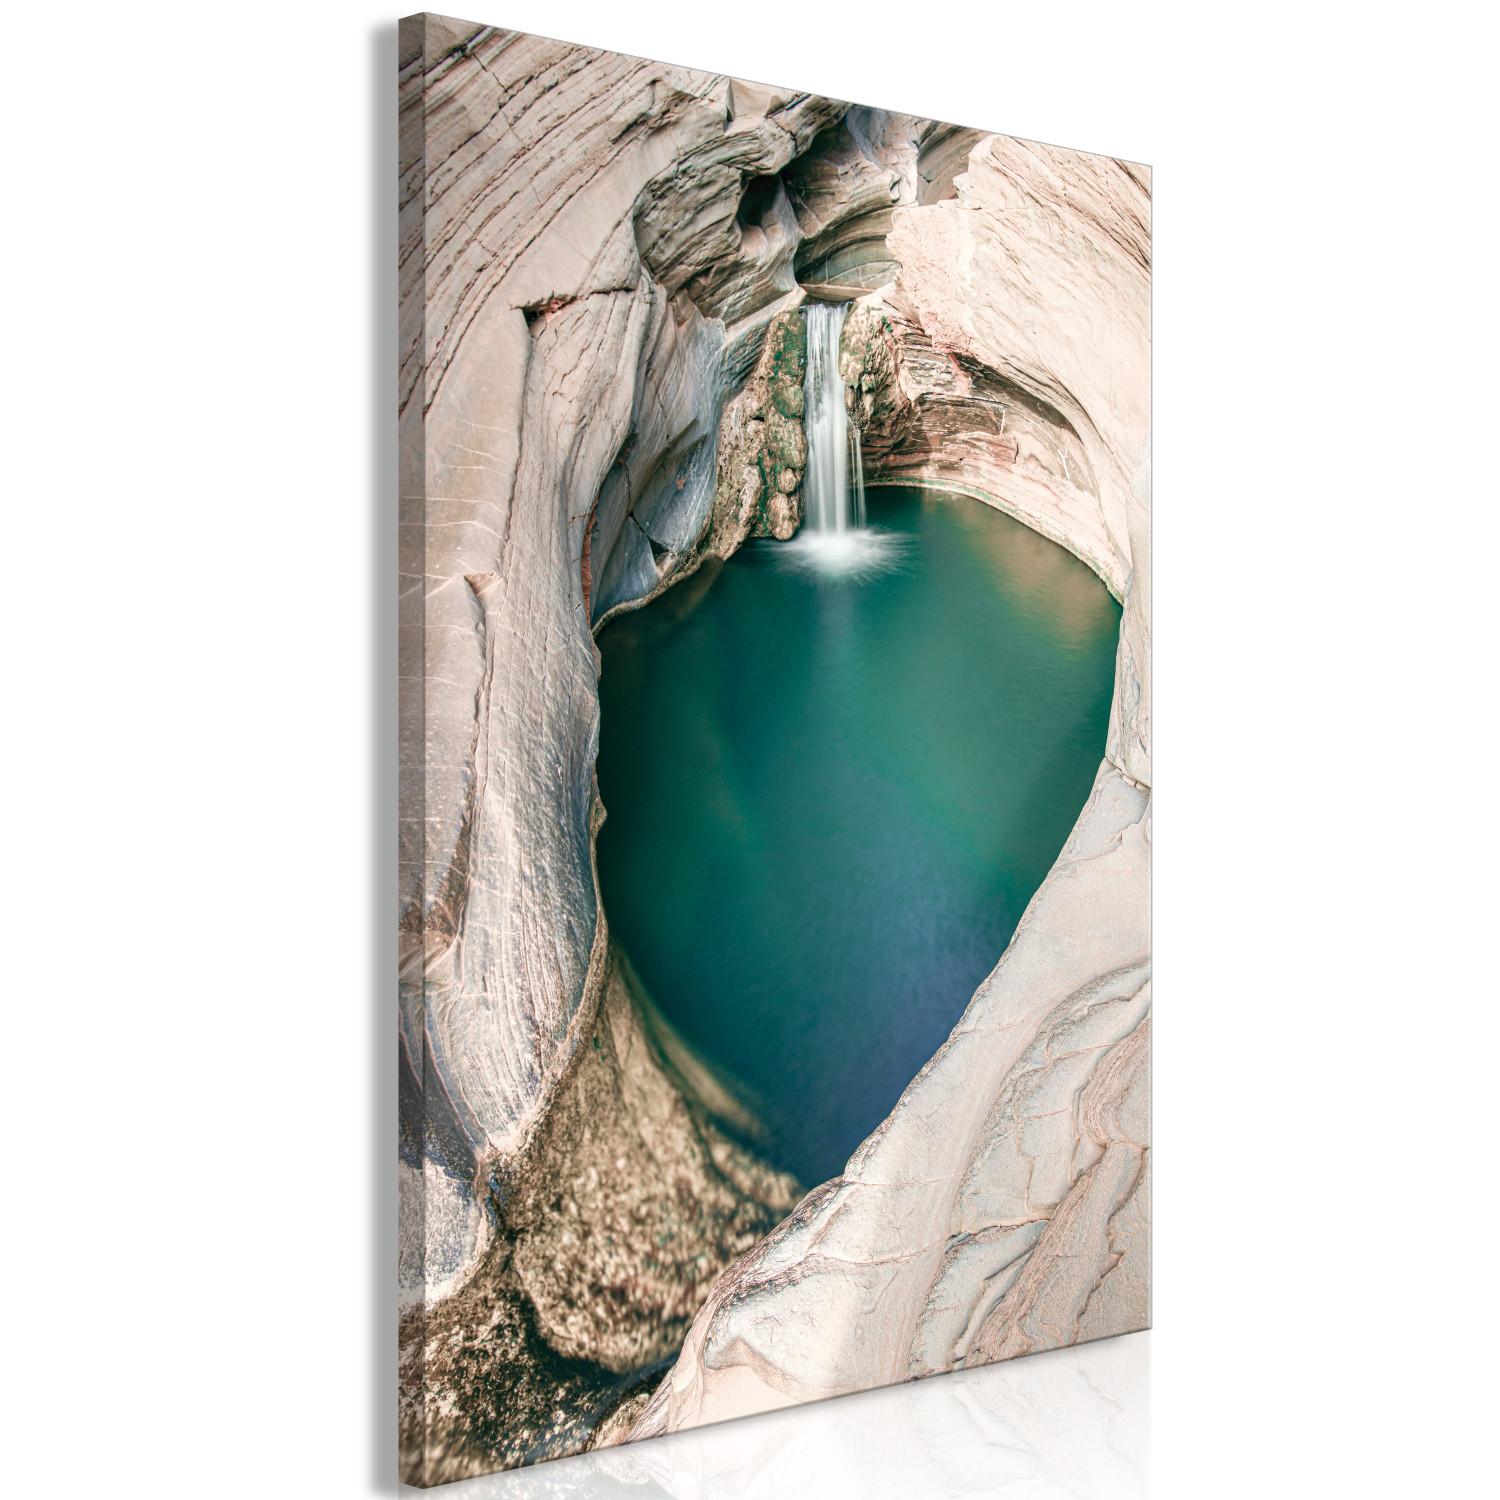 Canvas Closed bay - photo with a turquoise waterfall